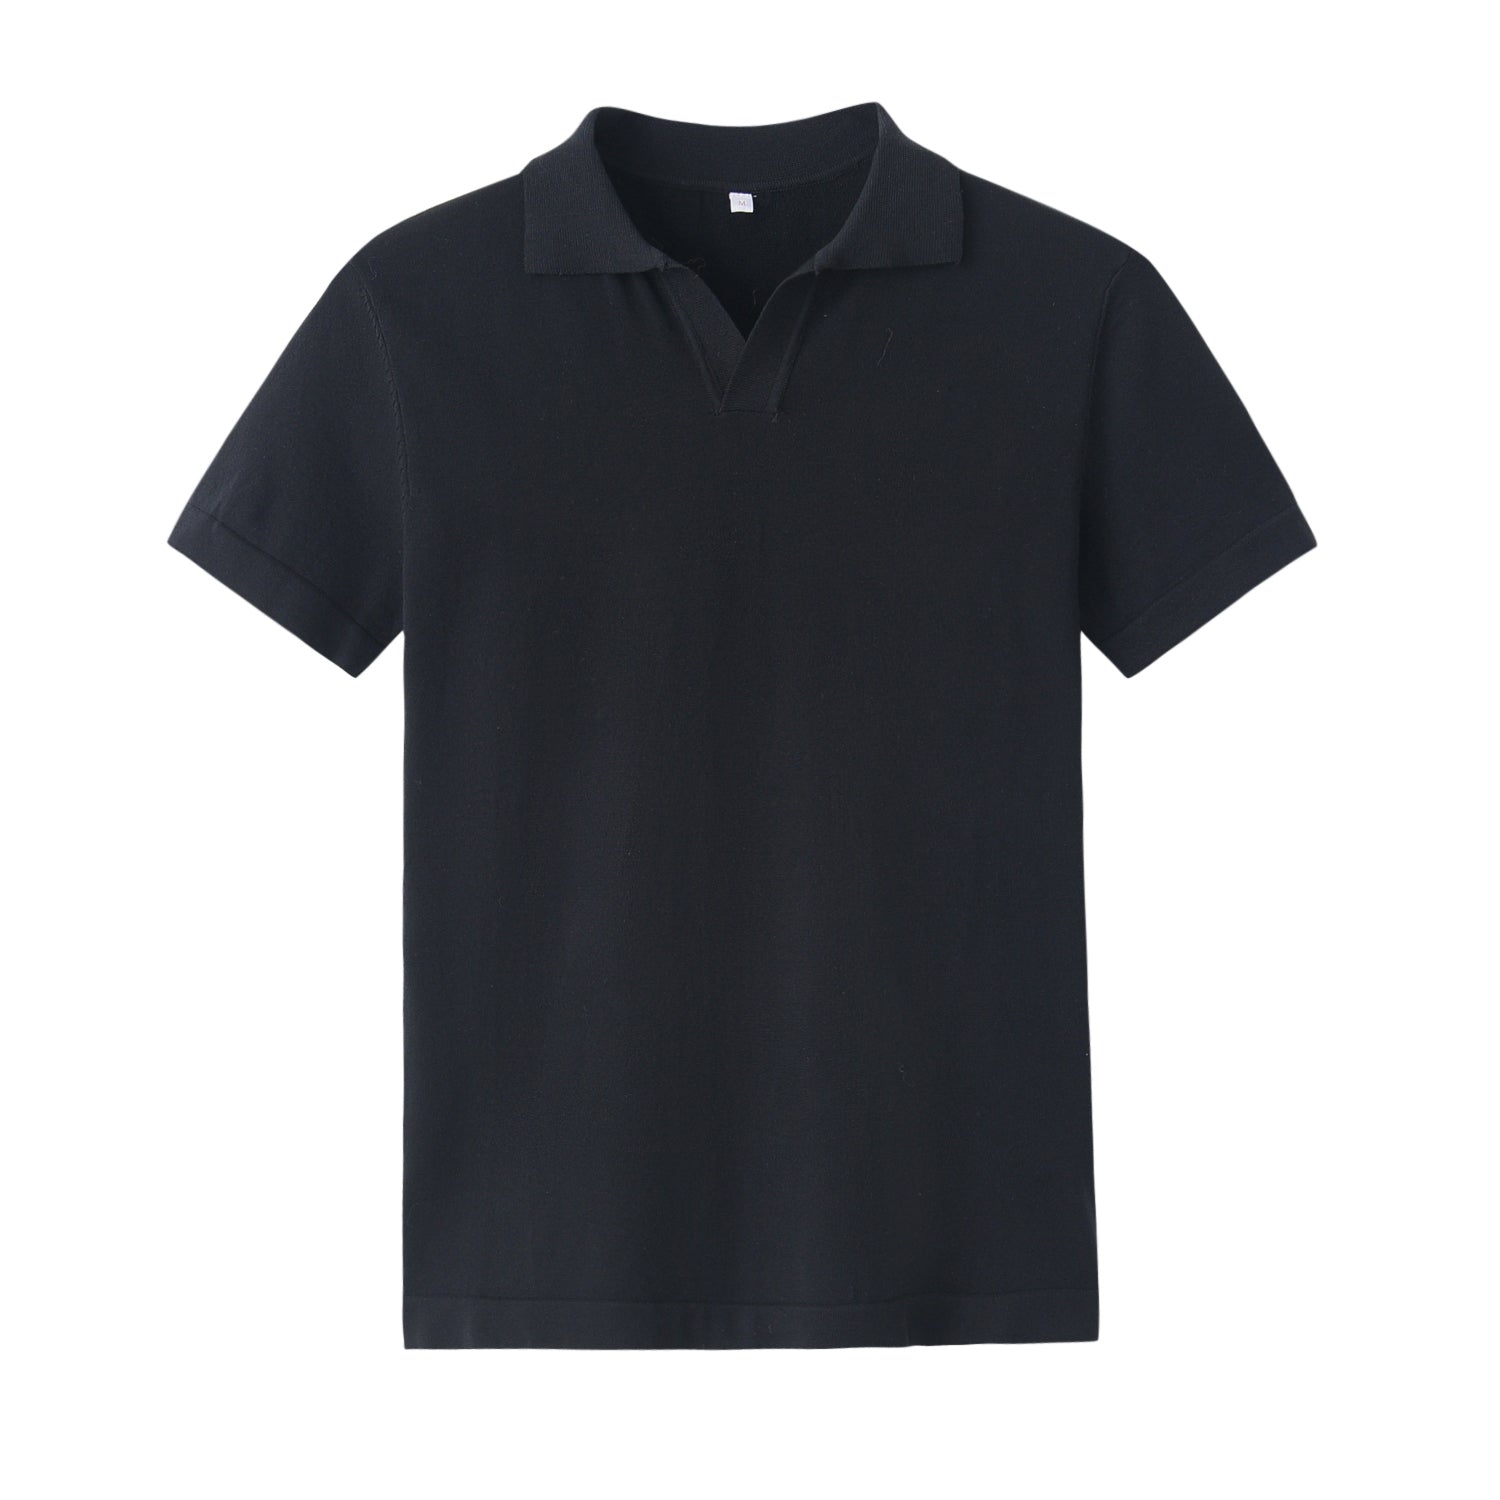 Buttonless Knit Polo